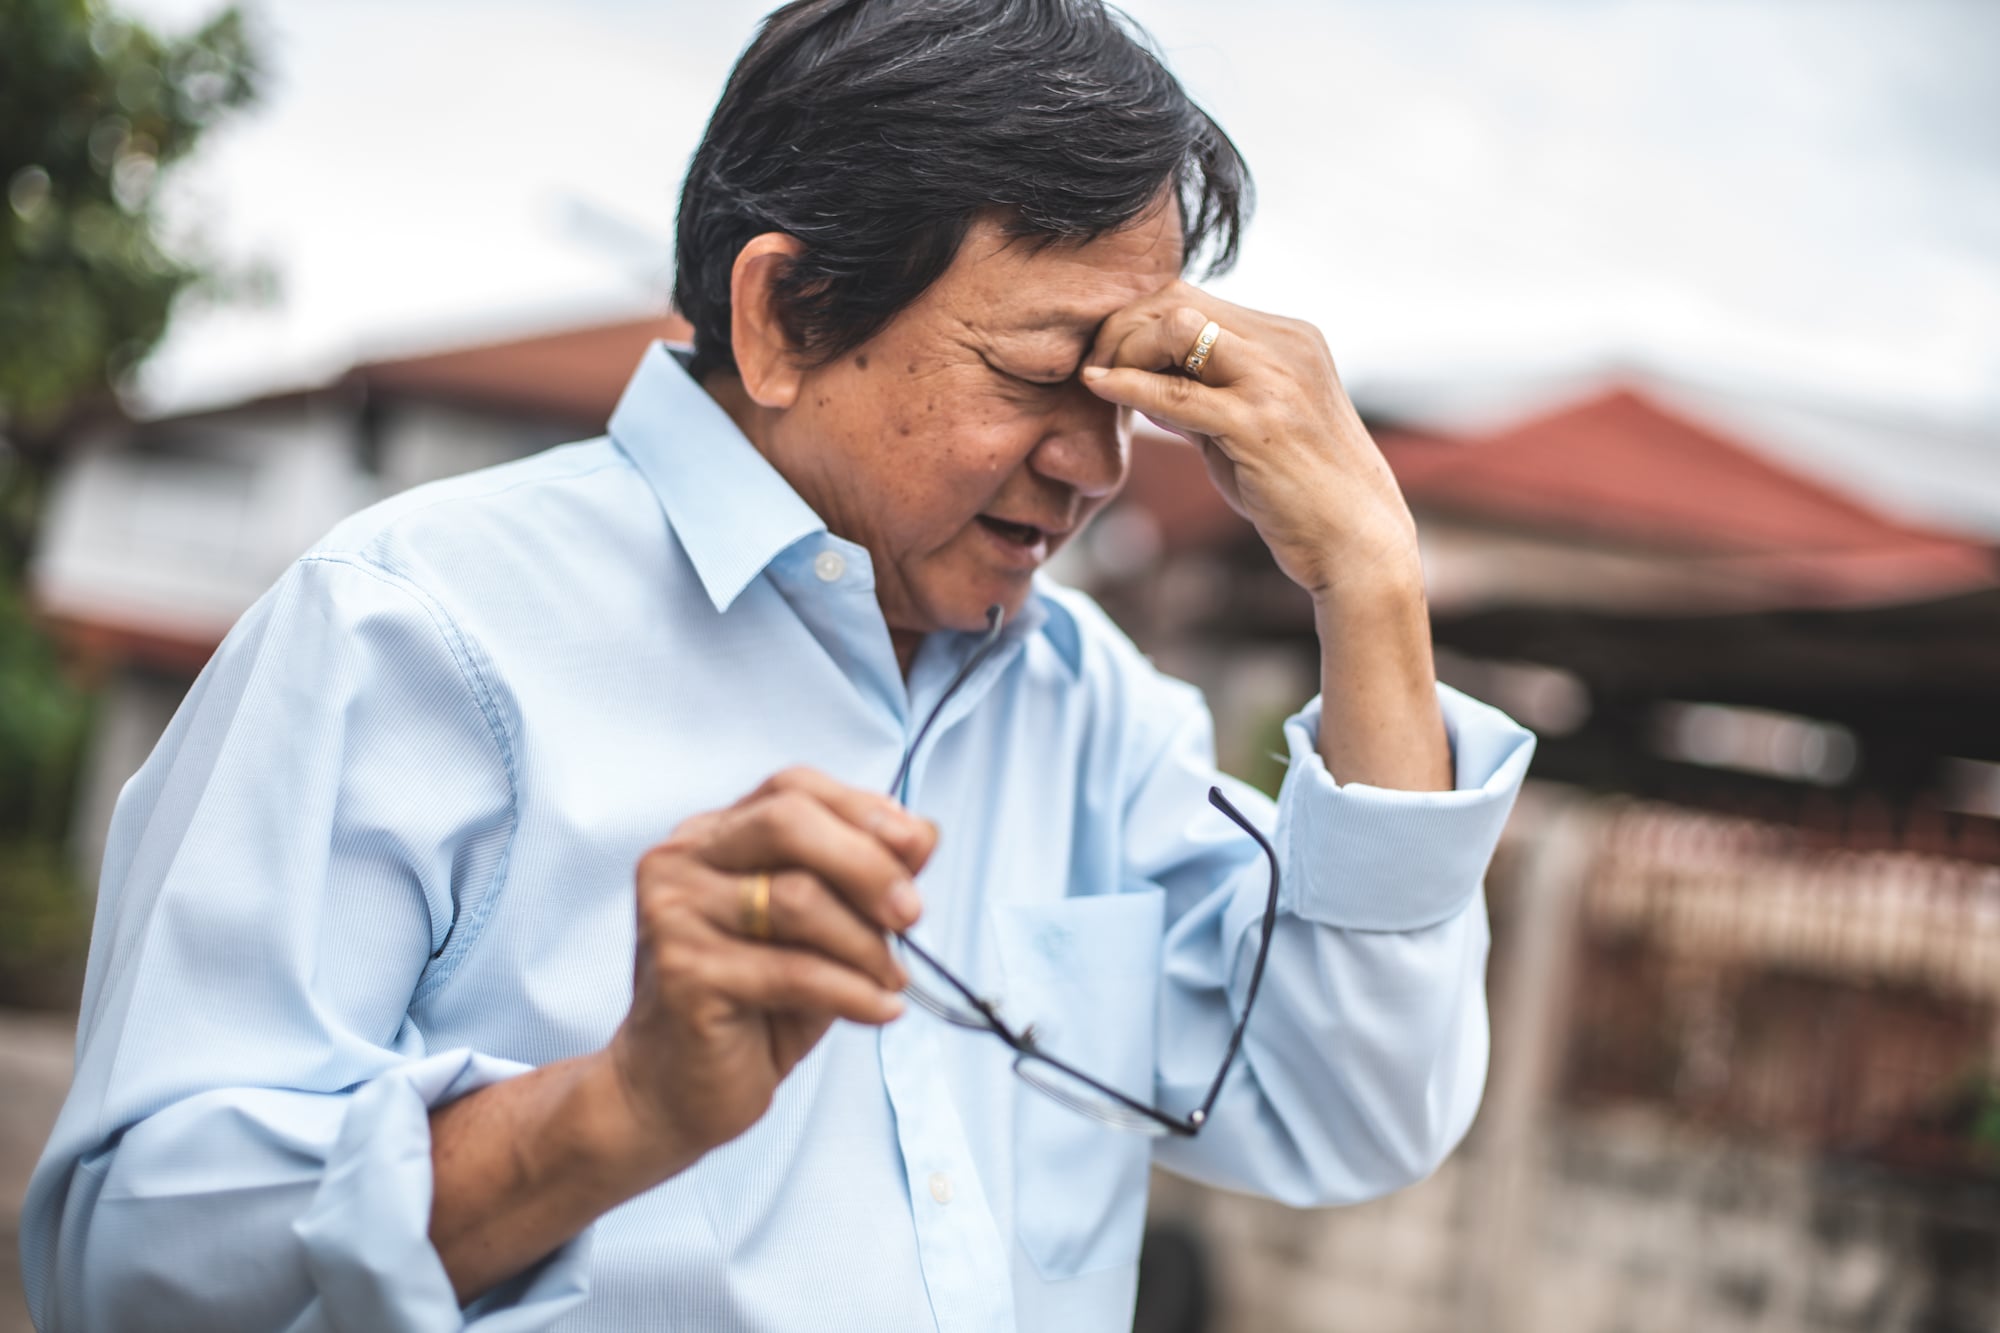 Portrait of an elderly man with headache.Asian elderly stress tired and holding his nose suffer sinus pain fatigue from hard work.